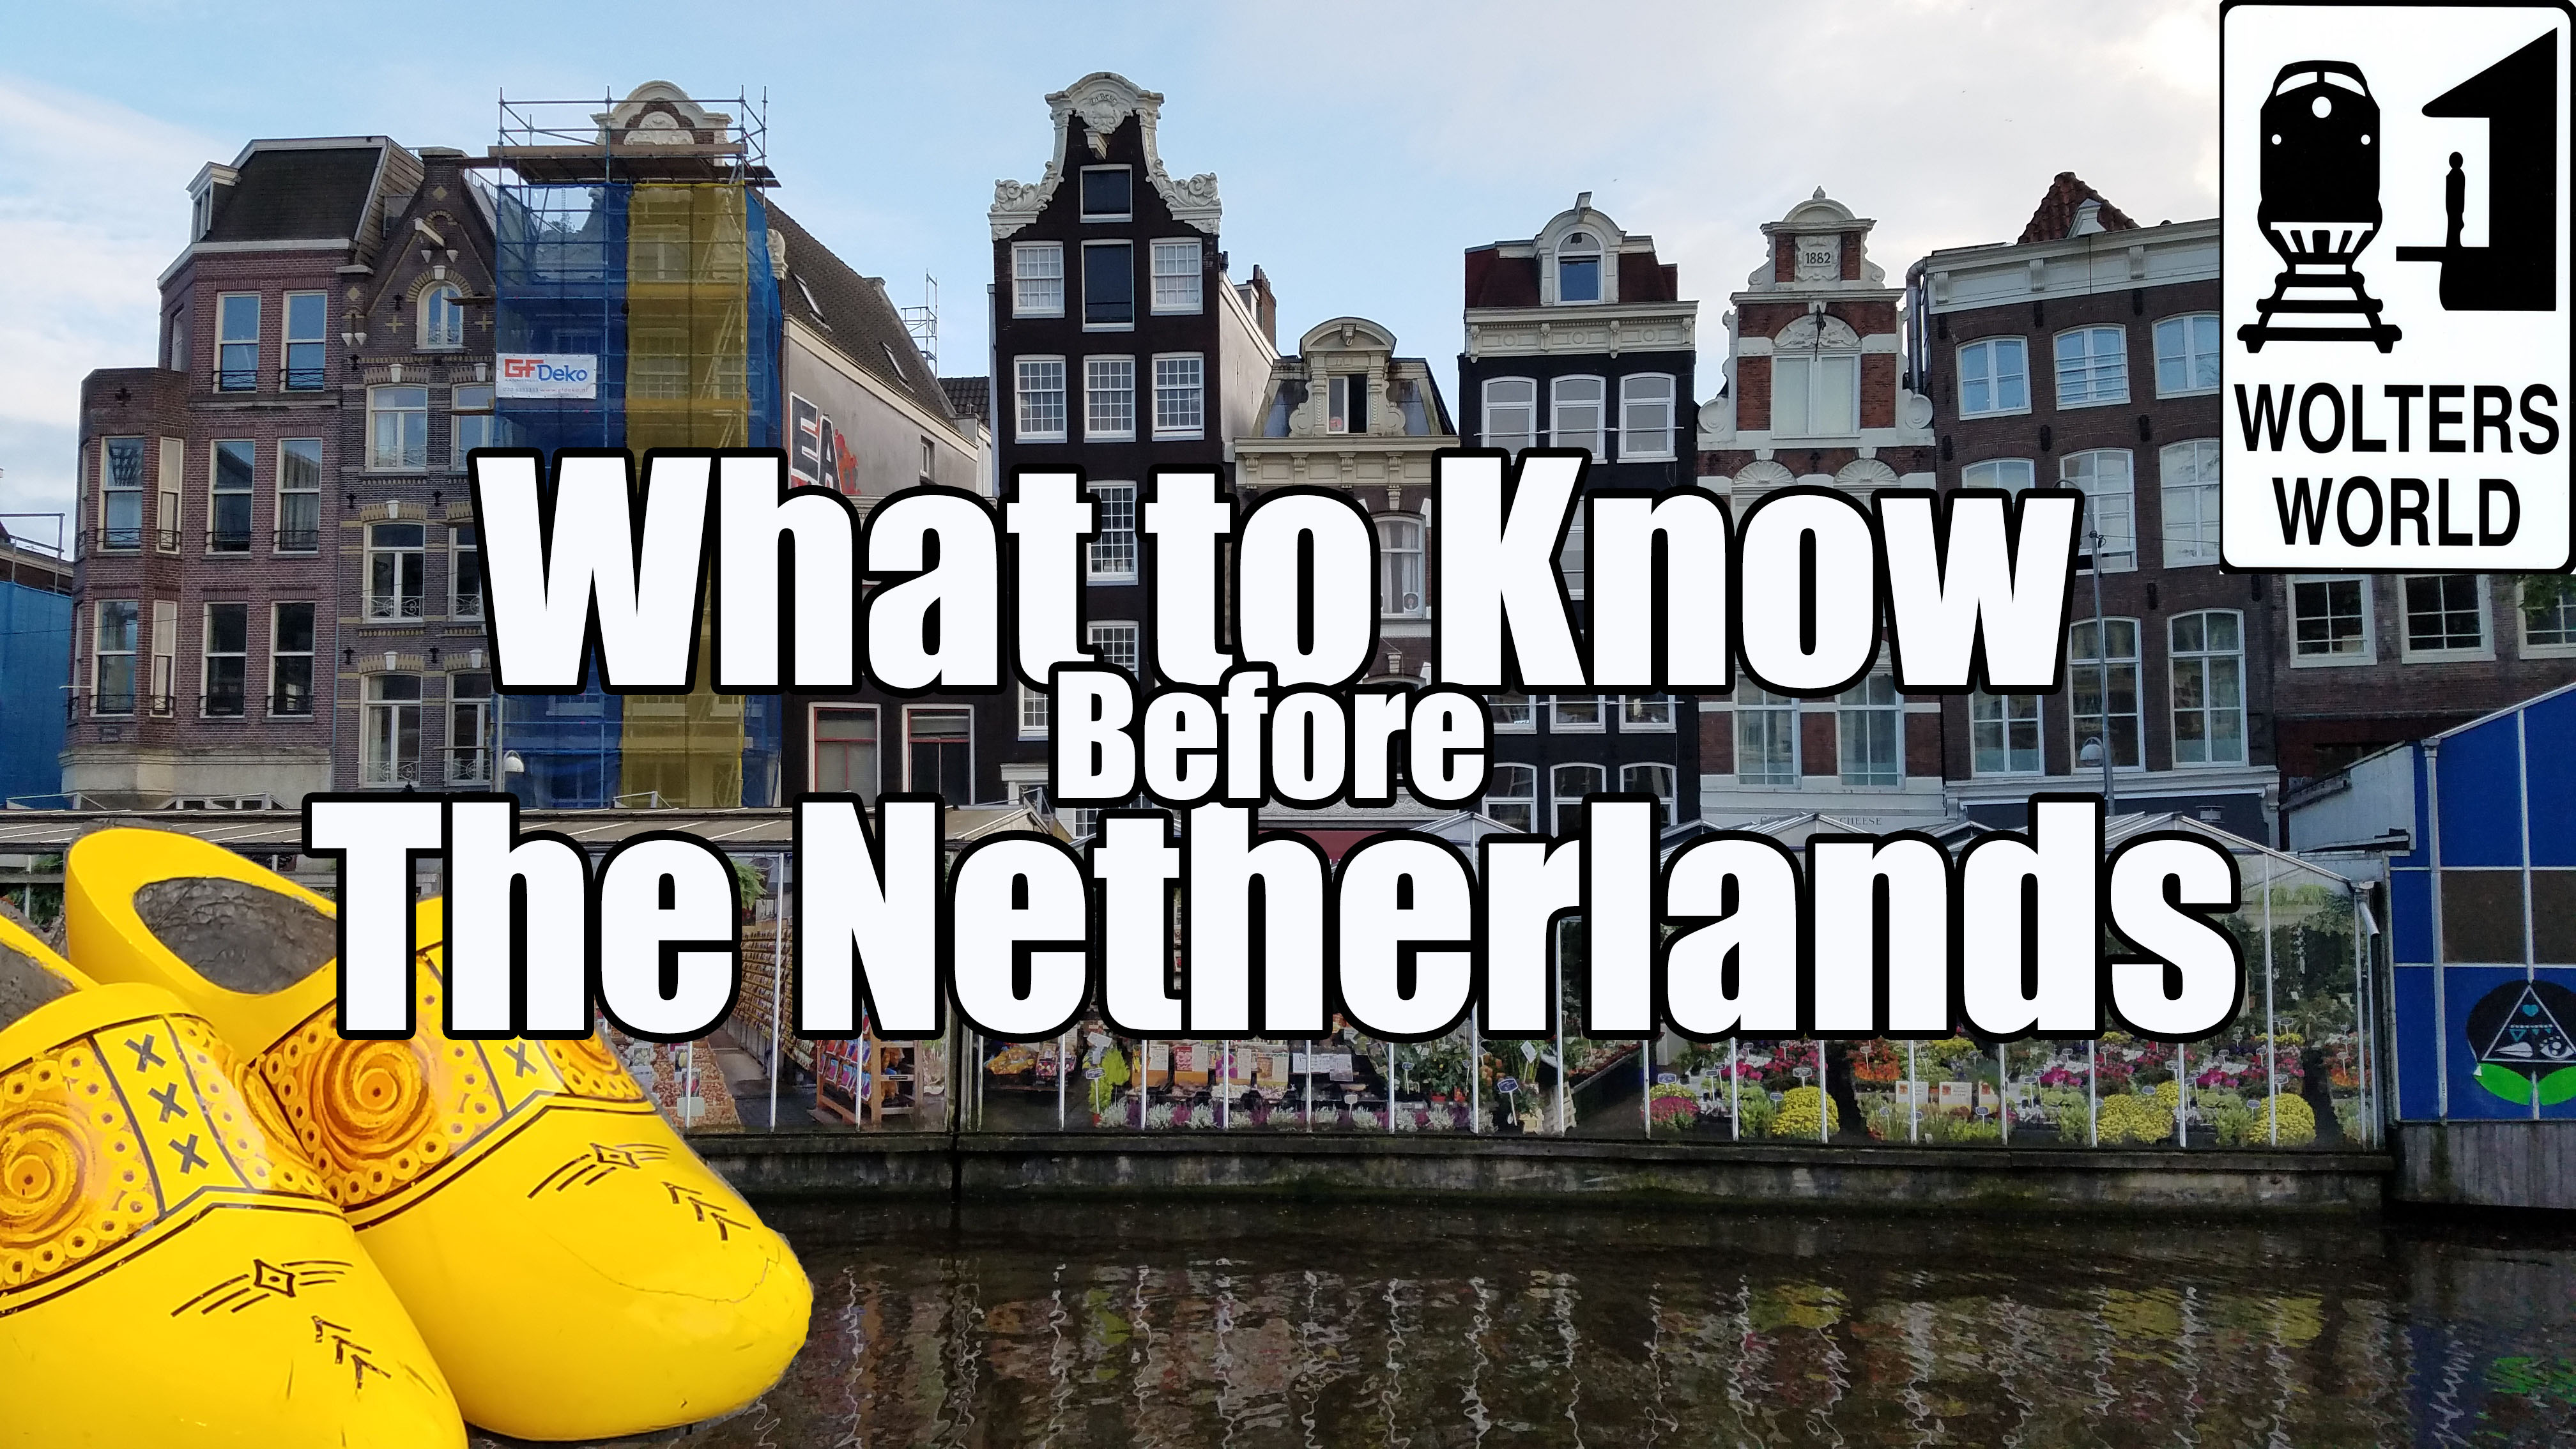 What You Need to Know Before You Visit The Netherlands - Wolters World